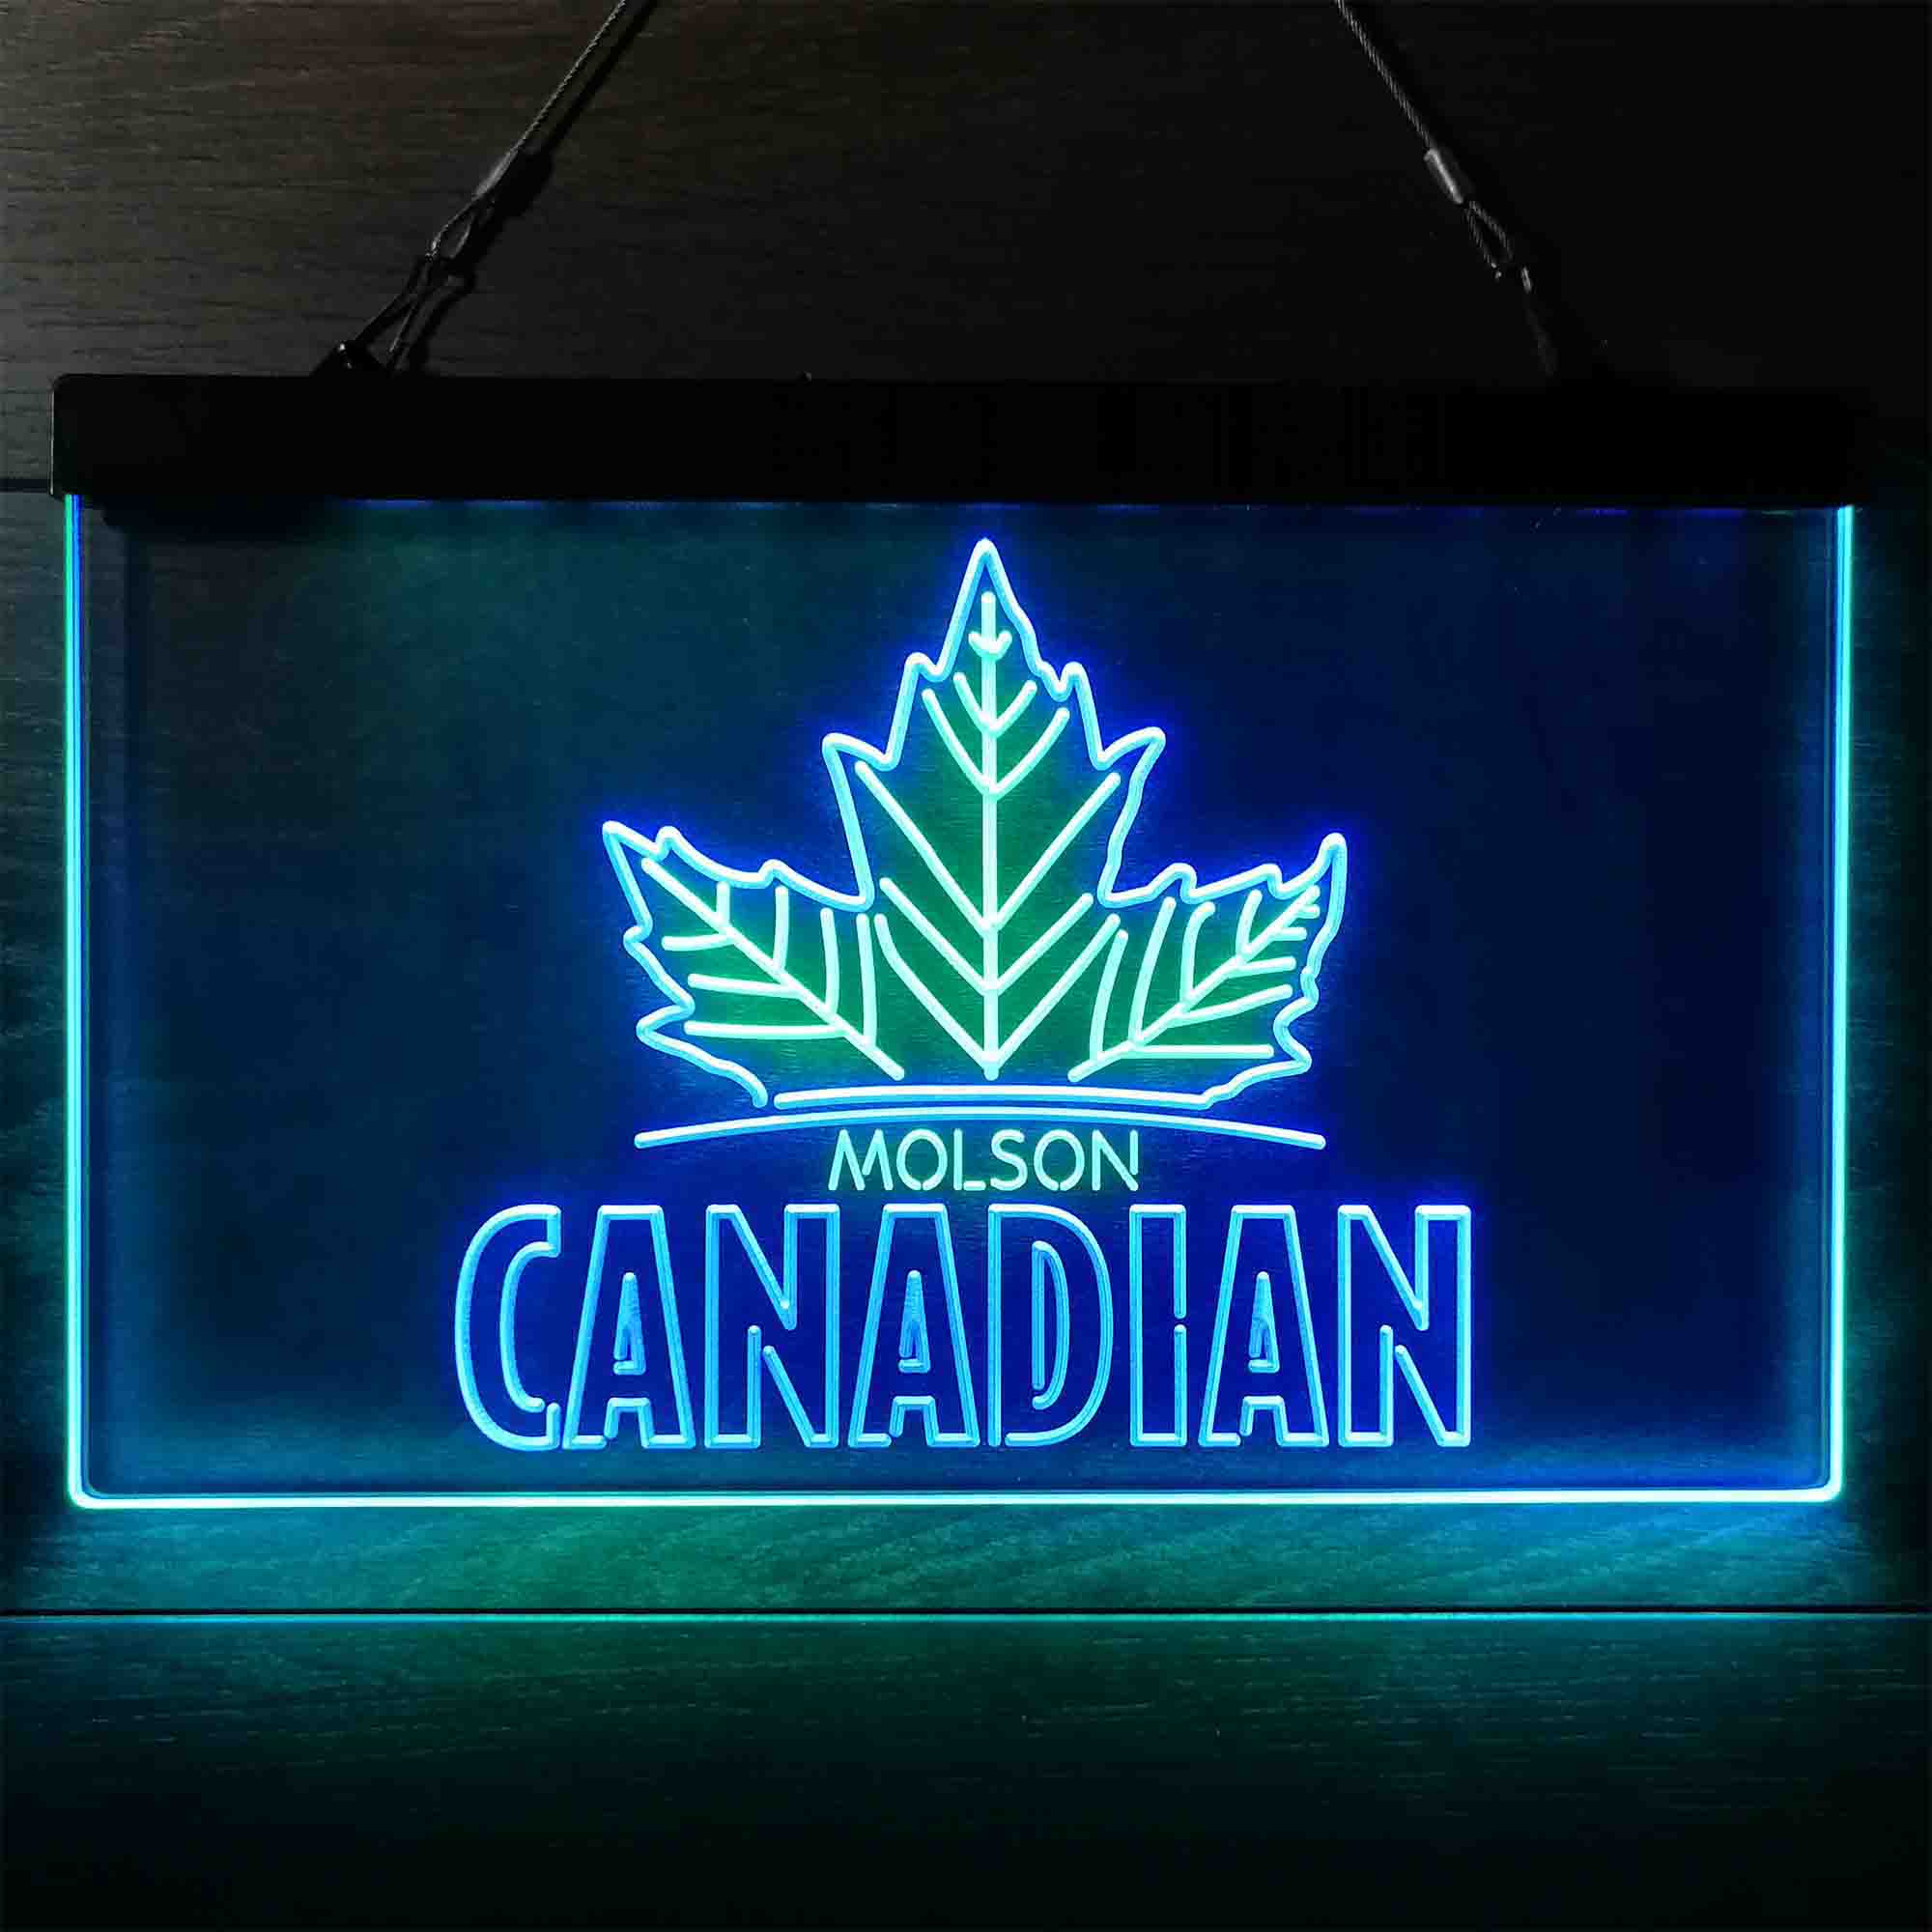 Canadian Molson Maple Leaf Neon LED Sign